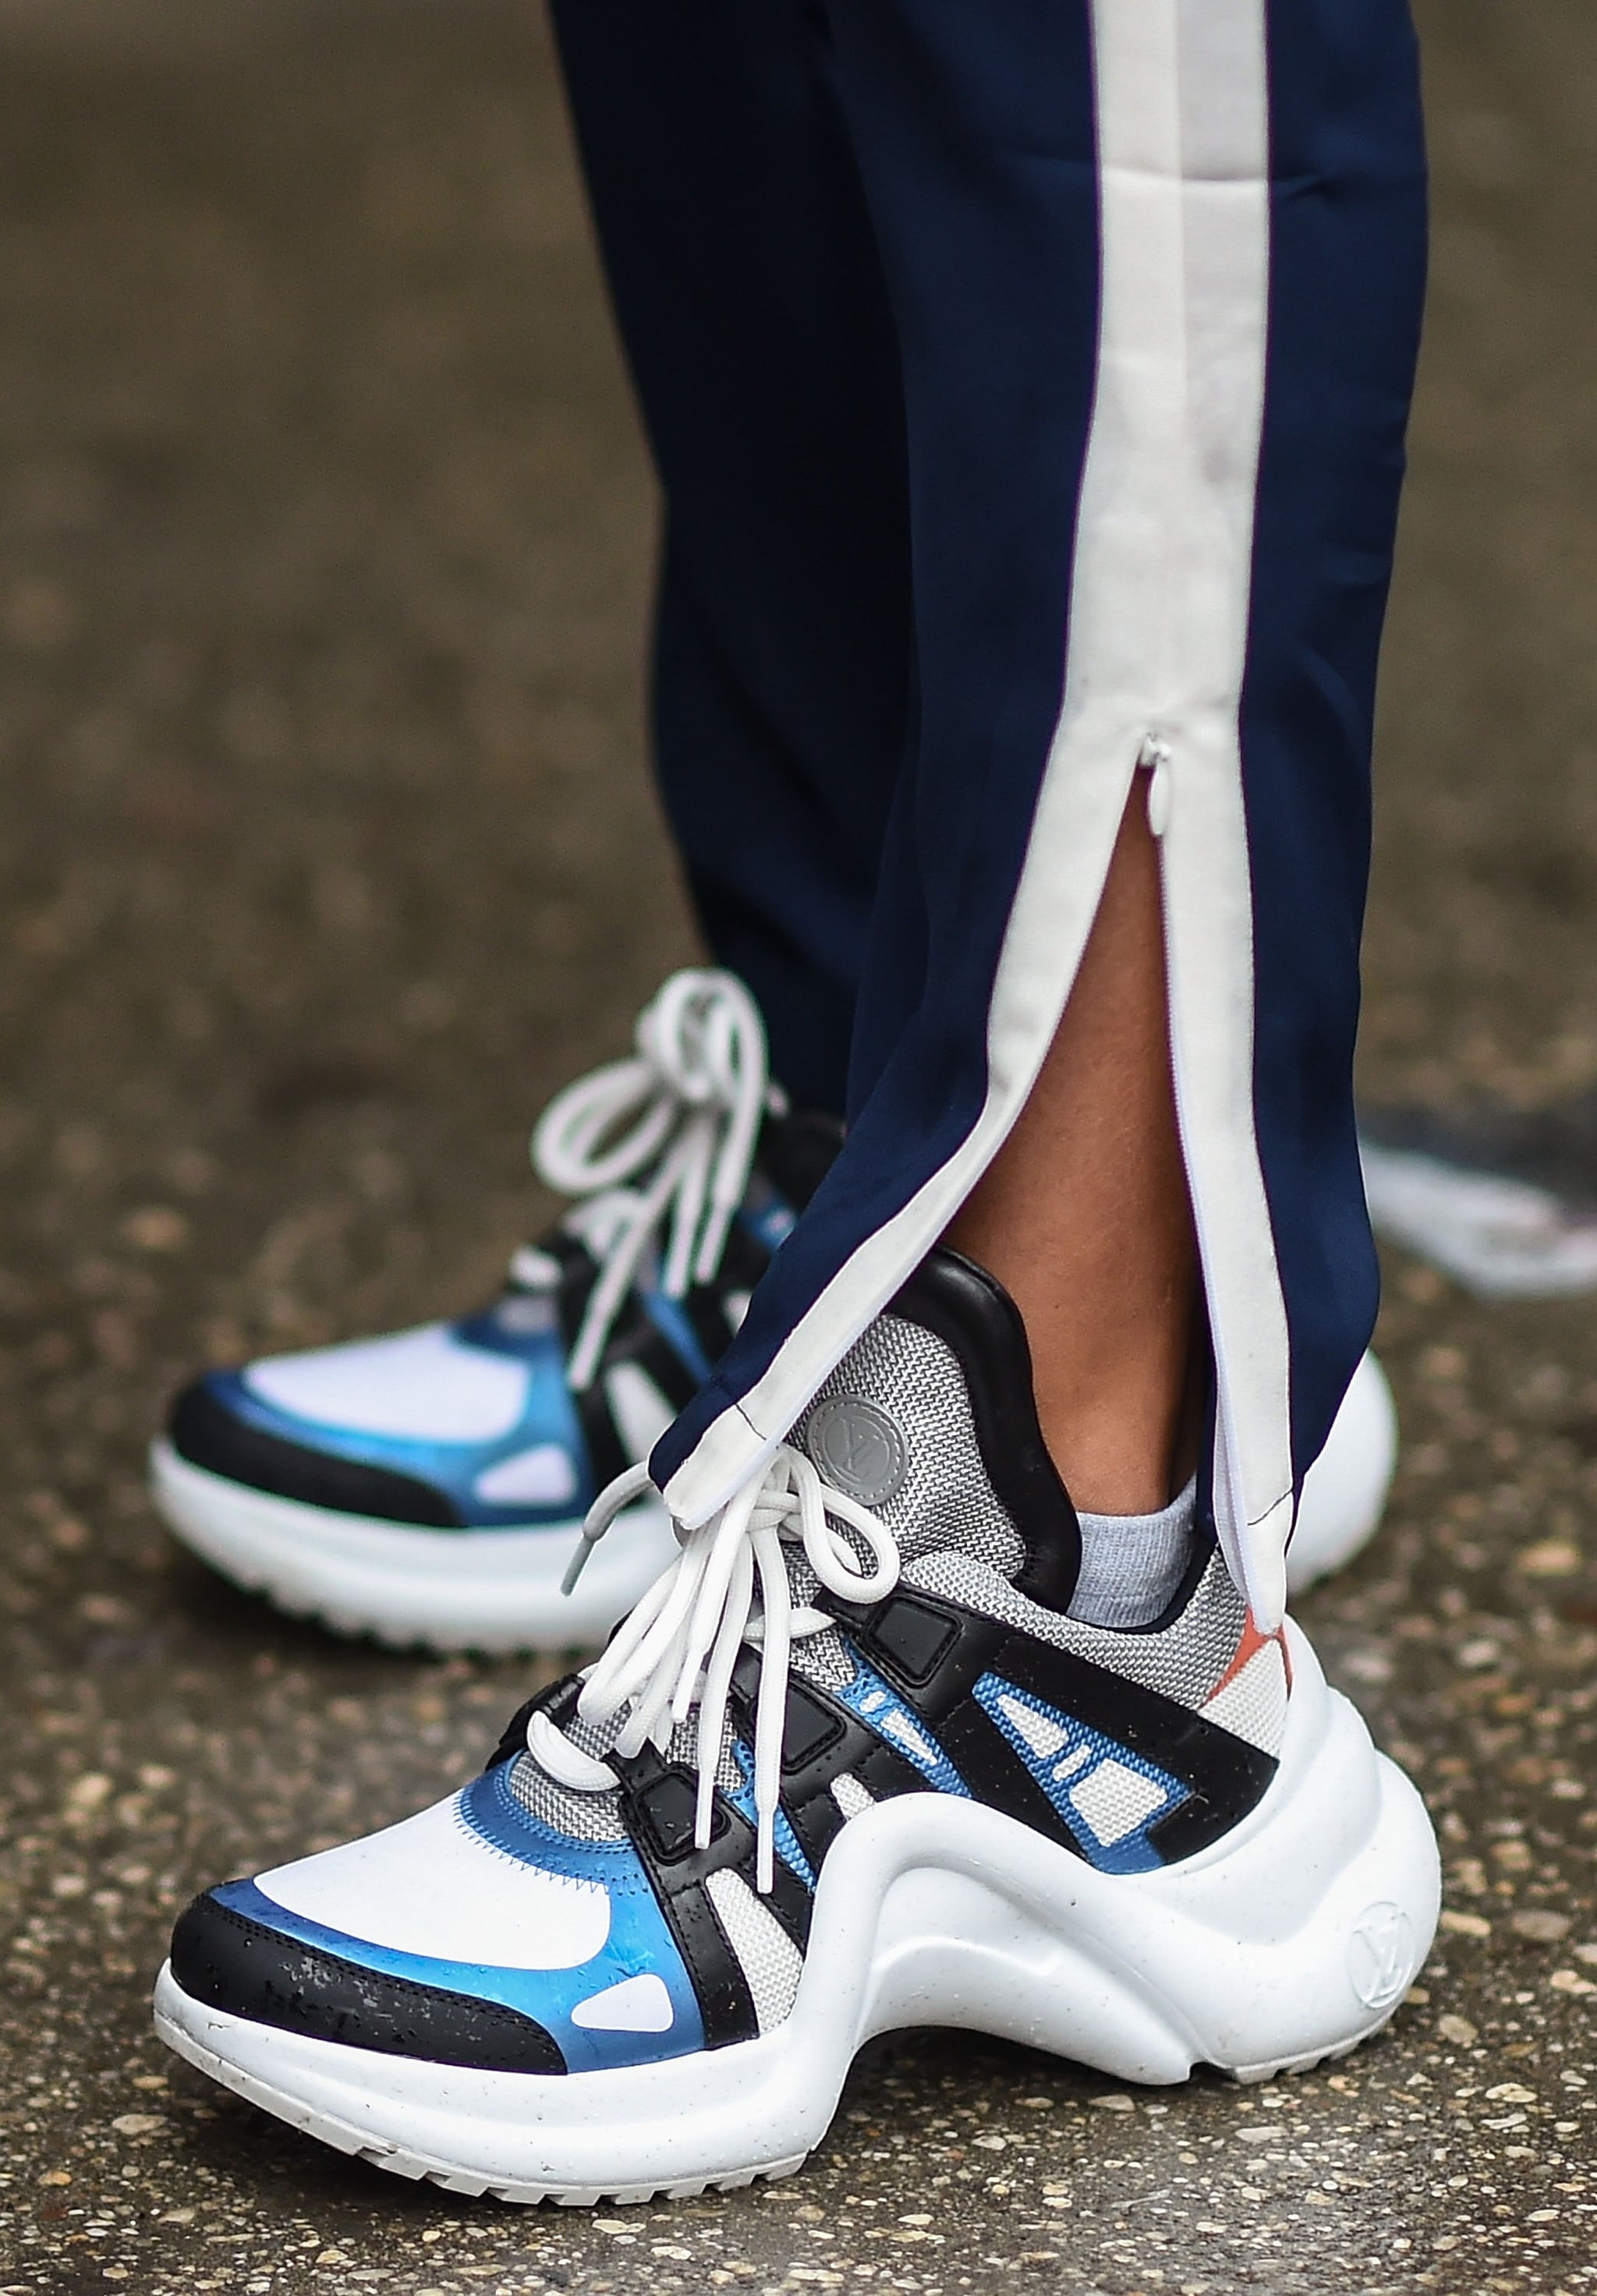 Louis Vuitton Archlight: A closer look at the dad sneaker of the moment